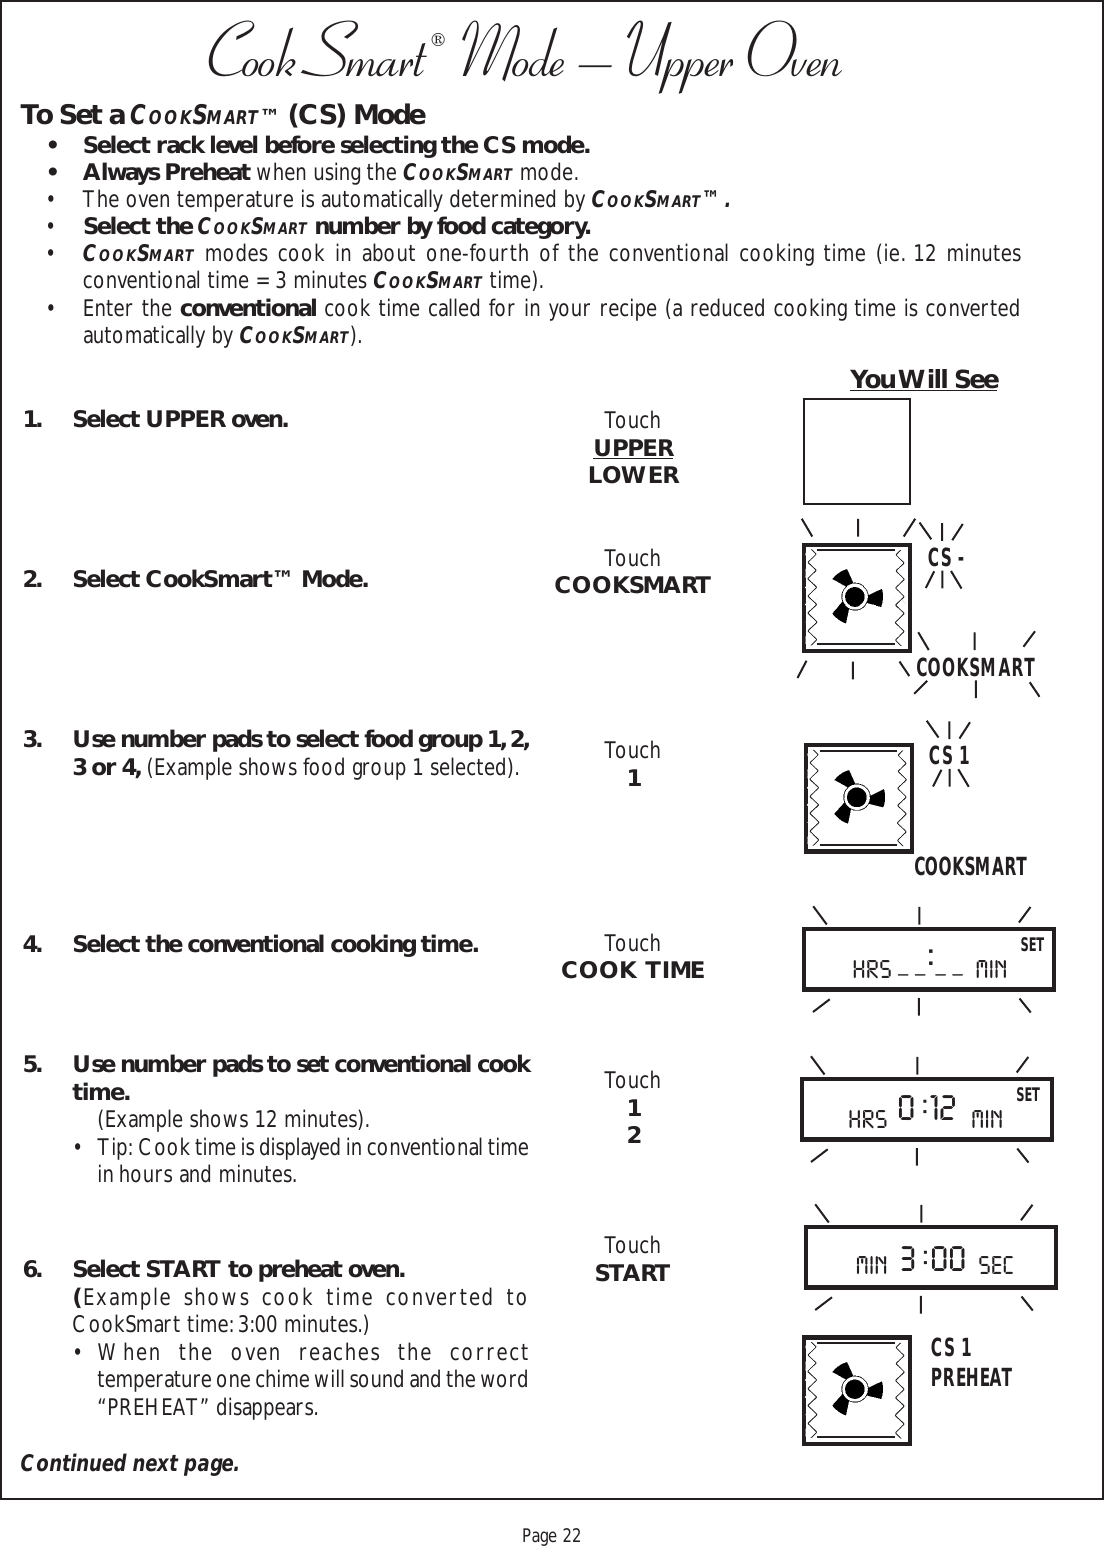 Proof 9-21-99Page 22CookSmart®  Mode – Upper Oven1. Select UPPER oven.2. Select CookSmart™ Mode.3. Use number pads to select food group 1, 2,3 or 4, (Example shows food group 1 selected).4. Select the conventional cooking time.5. Use number pads to set conventional cooktime.(Example shows 12 minutes).• Tip:  Cook time is displayed in conventional timein hours and minutes.6. Select START to preheat oven.(Example shows cook time converted toCookSmart time: 3:00 minutes.)• When the oven reaches the correcttemperature one chime will sound and the word“PREHEAT” disappears.TouchUPPERLOWERTouchCOOKSMARTTouch1TouchCOOK  TIMETouch12TouchSTARTTo Set a COOKSMART™ (CS) Mode• Select rack level before selecting the CS mode.• Always Preheat when using the COOKSMART mode.• The oven temperature is automatically determined by COOKSMART™.•Select the COOKSMART number by food category.•COOKSMART modes cook in about one-fourth of the conventional cooking time (ie. 12 minutesconventional time = 3 minutes COOKSMART time).• Enter the conventional cook time called for in your recipe (a reduced cooking time is convertedautomatically by COOKSMART).You Will SeeC S -C S 1COOKSMARTCOOKSMARTmin sec3 : 00SETHRS min_ _ : _ _0 : 12 SETHRS minC S 1PREHEATContinued next page.